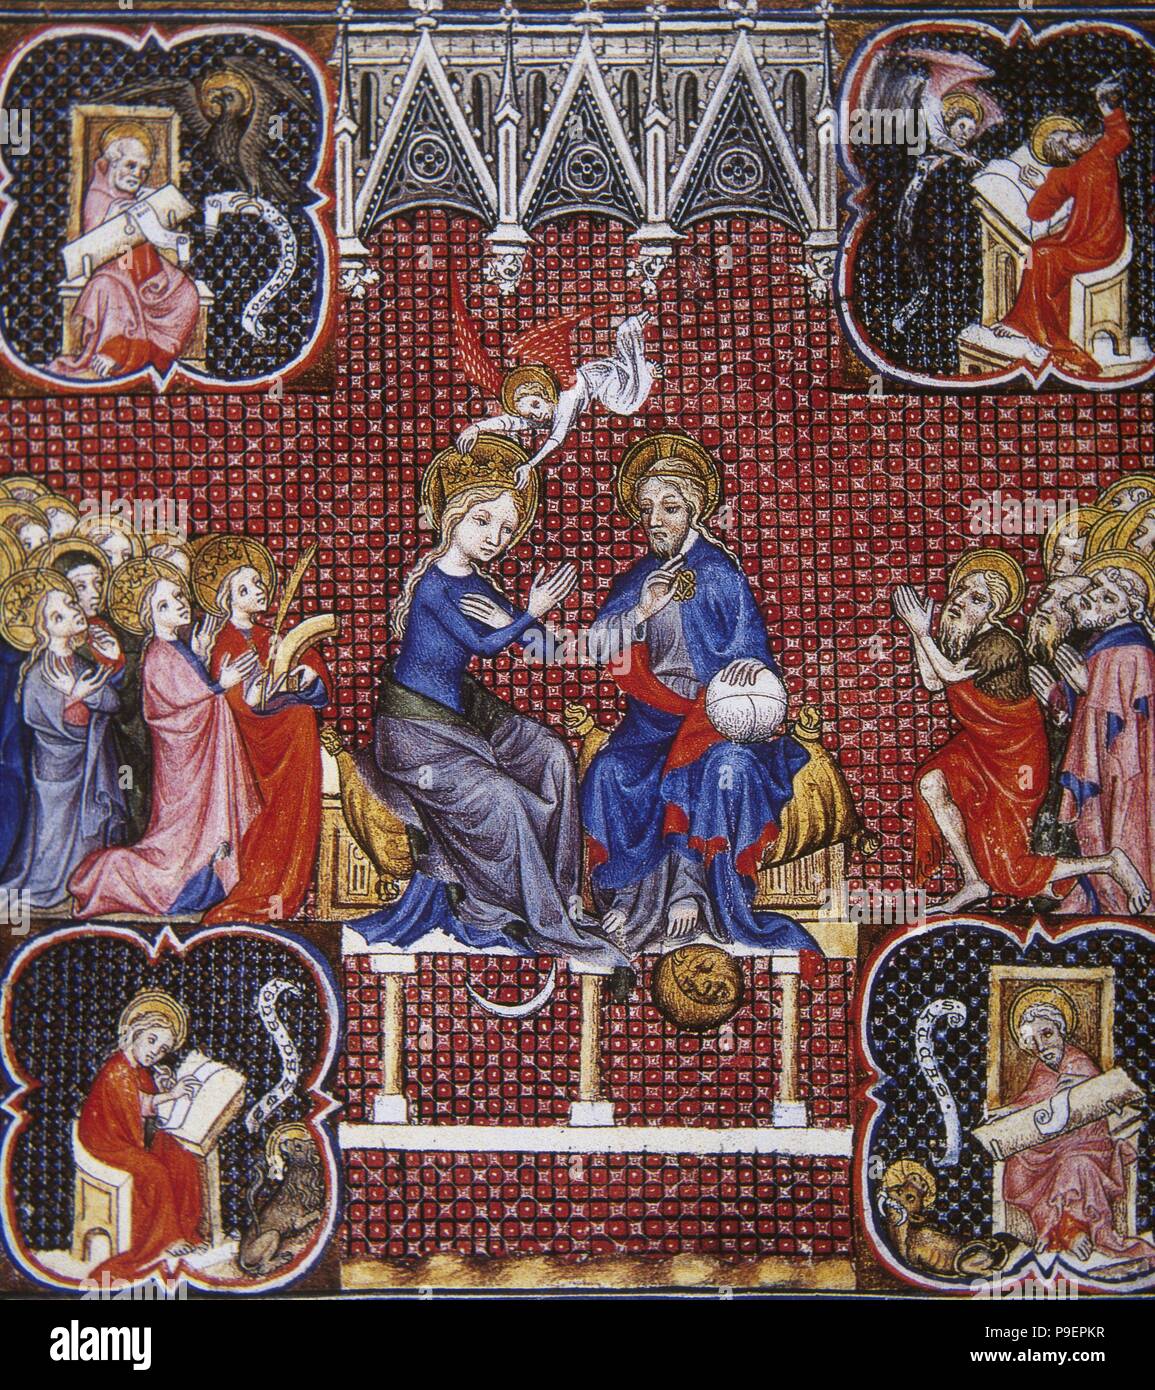 The Golden Legend. Colecction of the legendary lives of the greater saints of the medieval church. By italian chronicler Jacobus da Varagine (1230-1298). Coronation of Virgin Mary. Miniature. Stock Photo